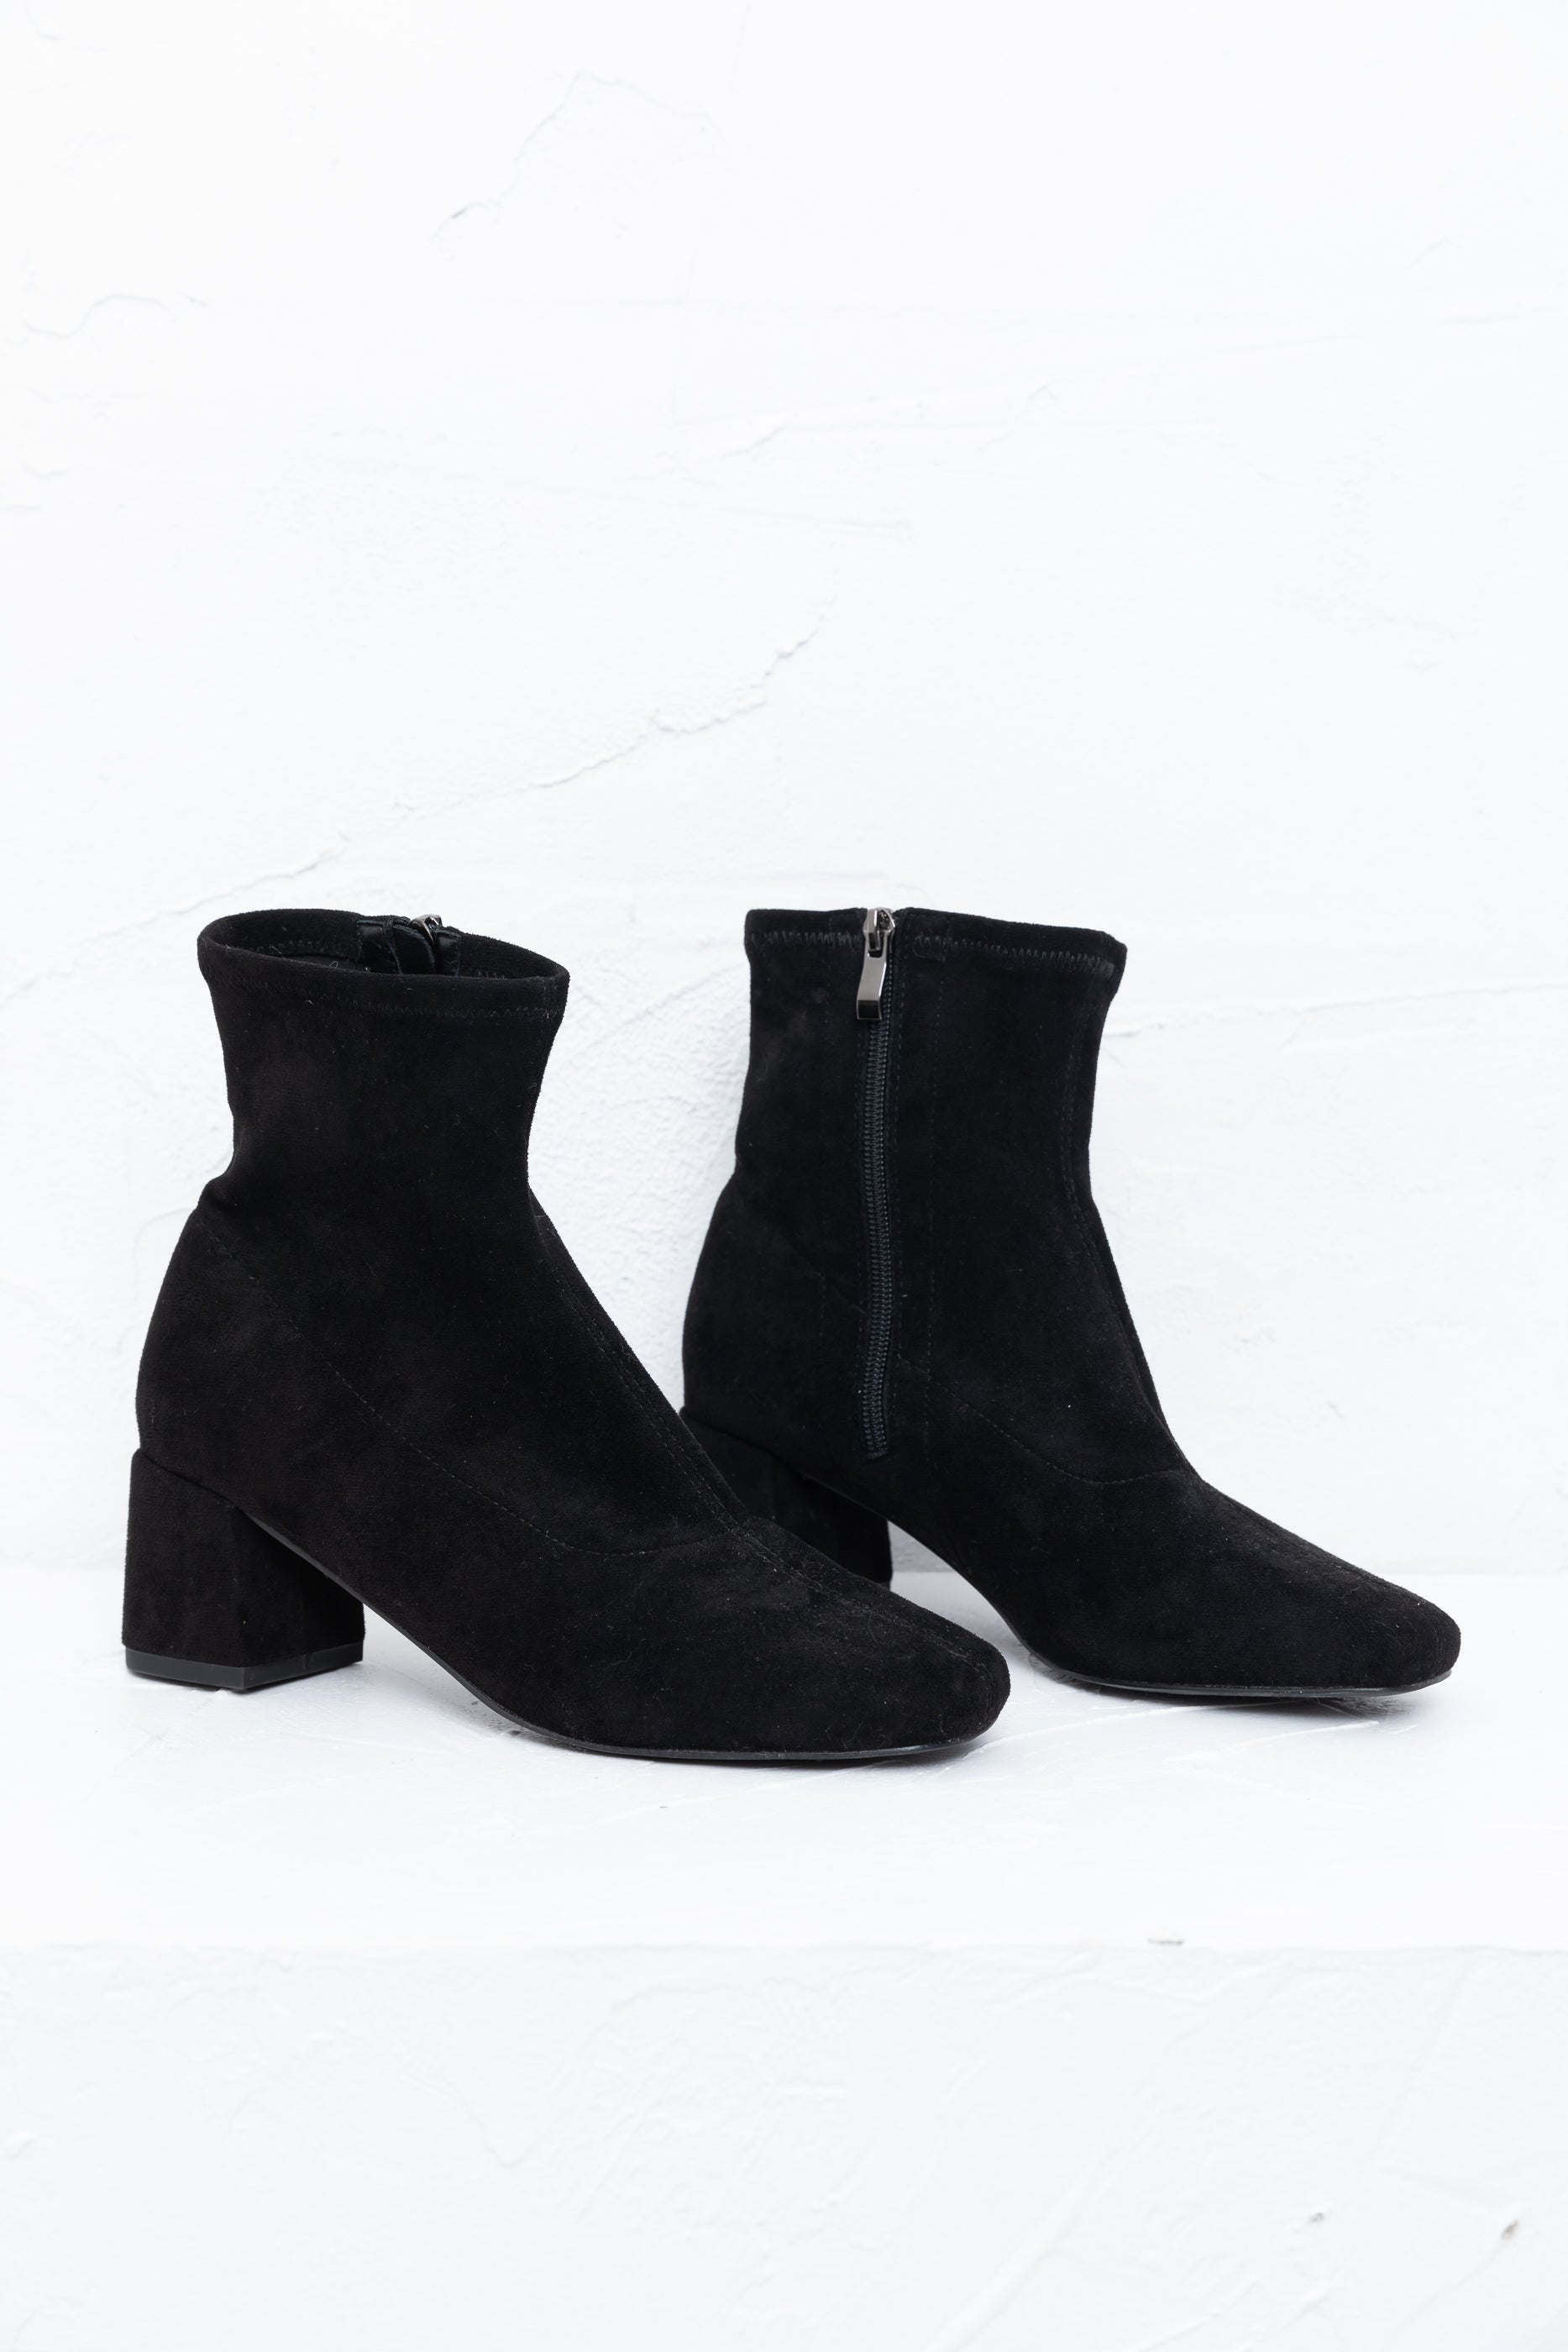 Petra Boots - Black-Footwear-Holiday-The Bay Room